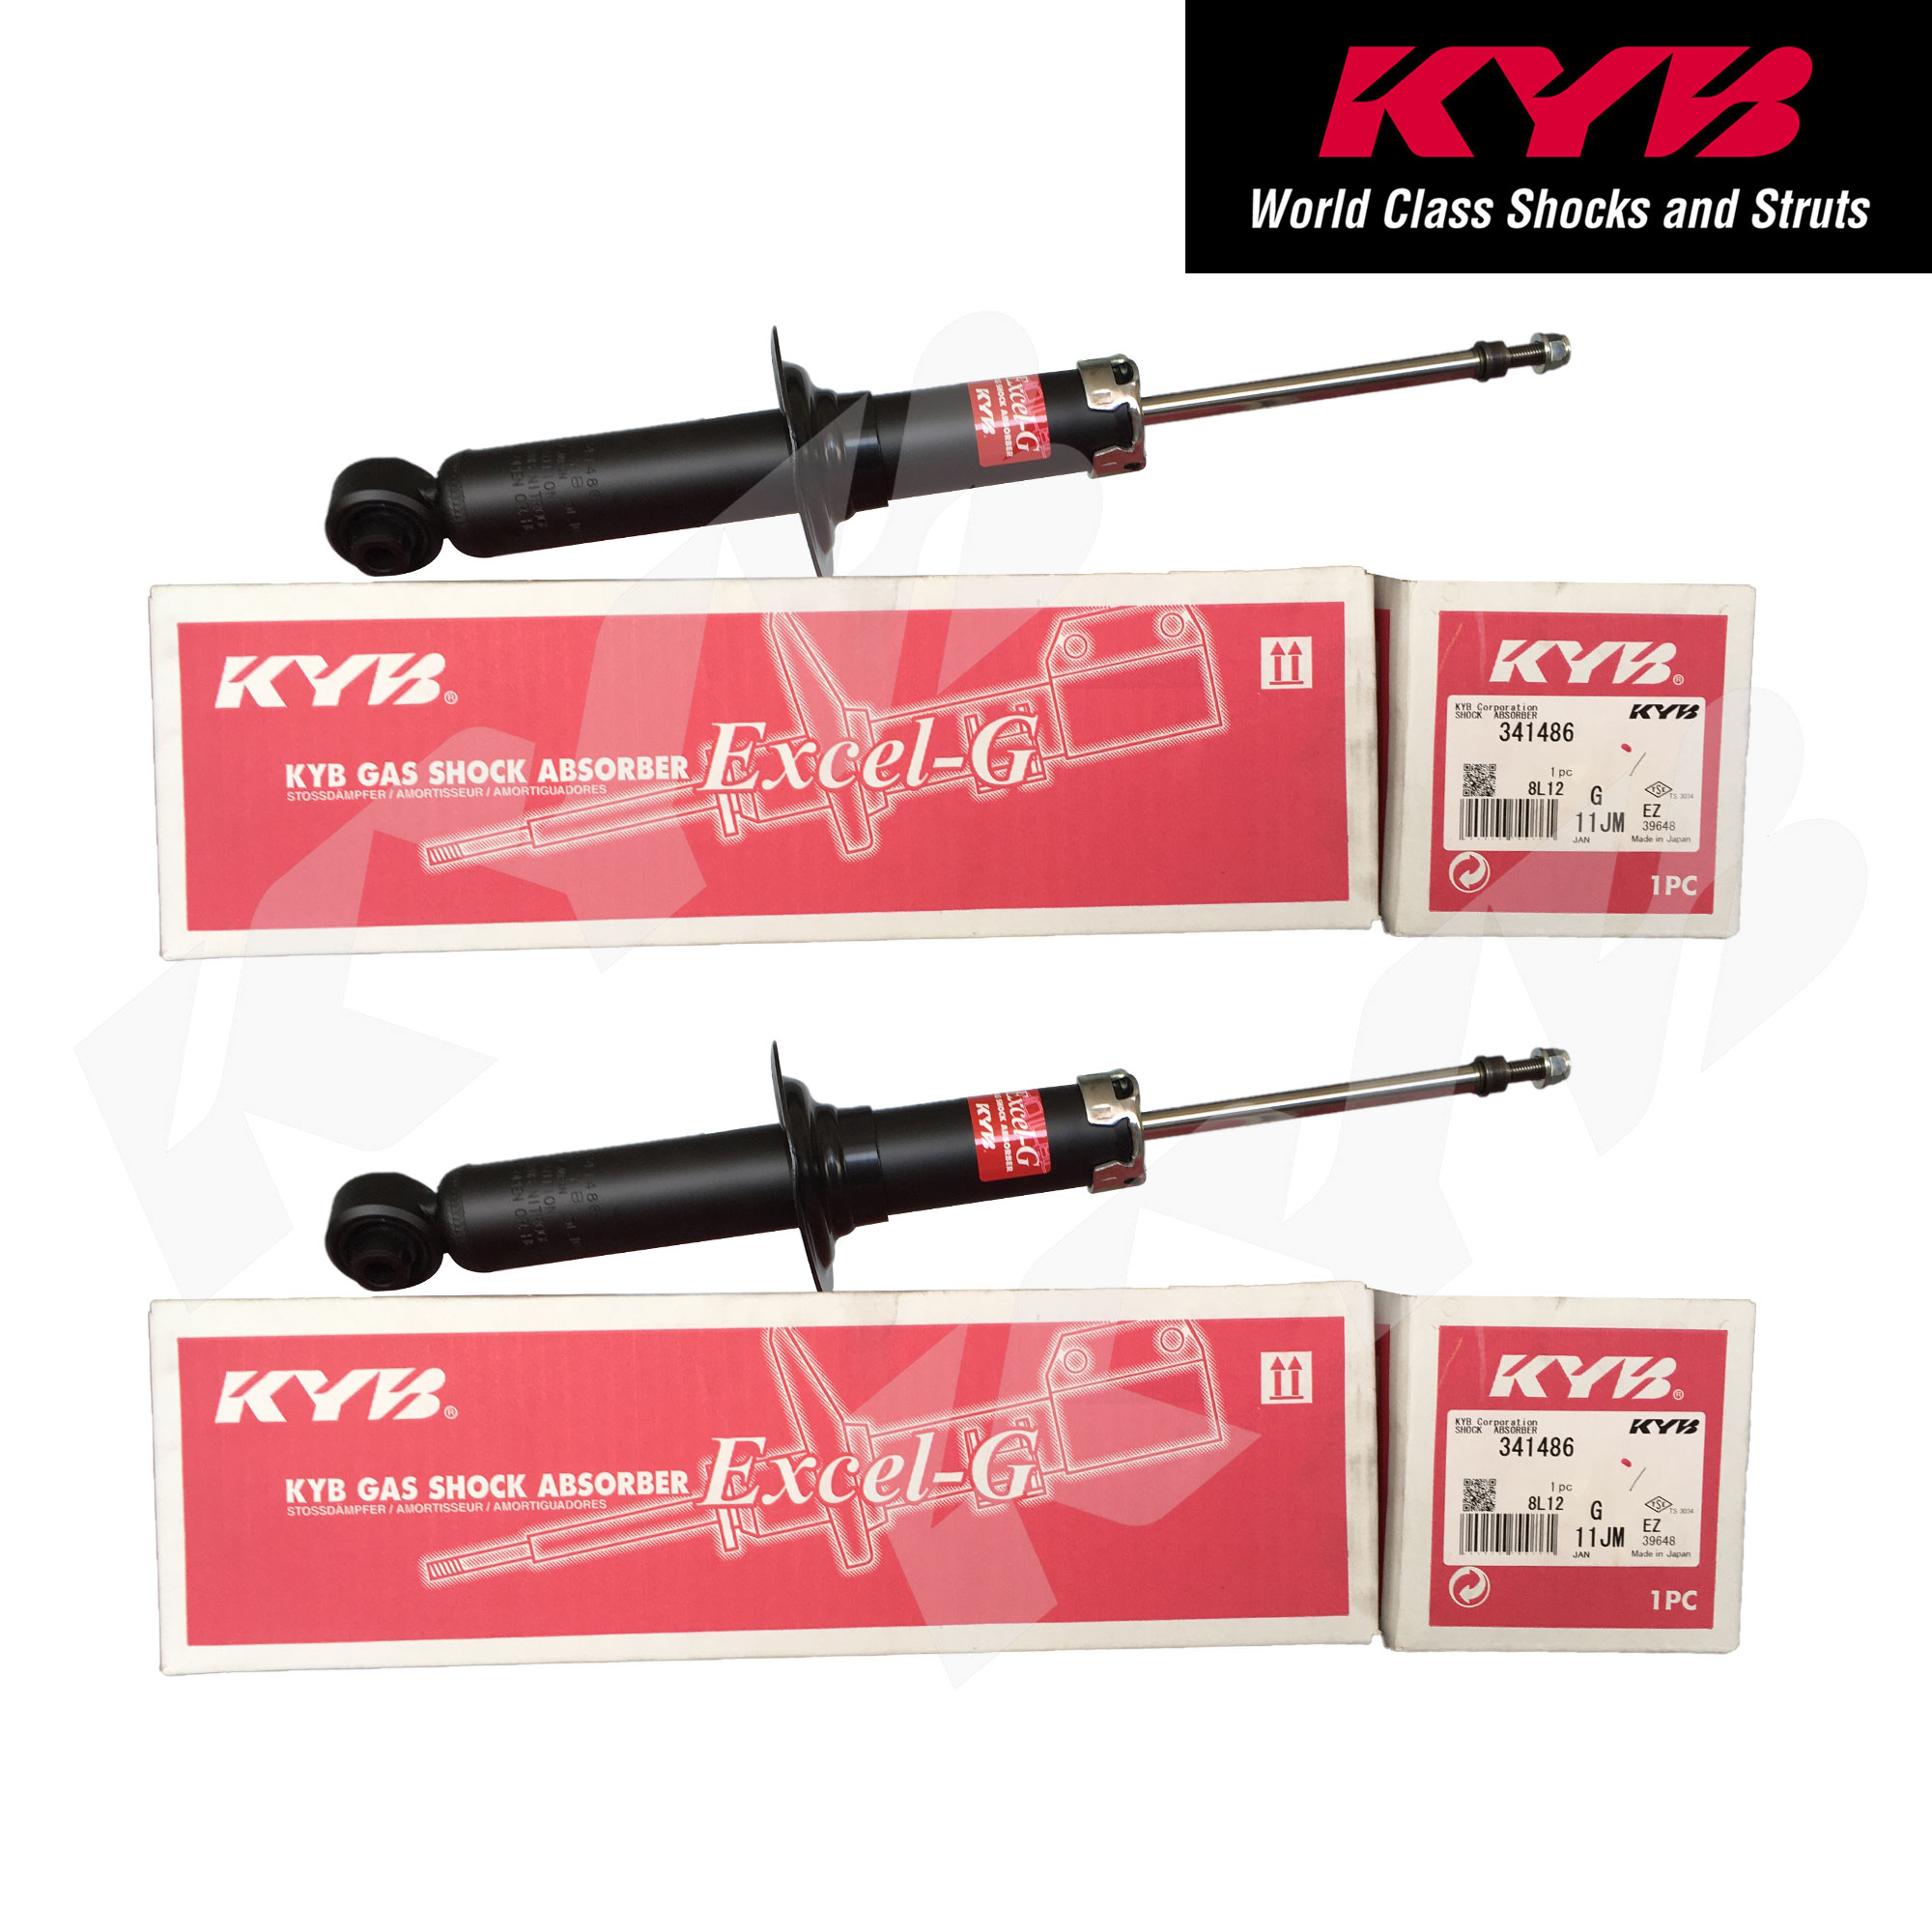 Details about   KYB 2 REAR STRUTS SHOCKS FITS SUBARU FORESTER 2009 09 10 11 12 to 2013  341486